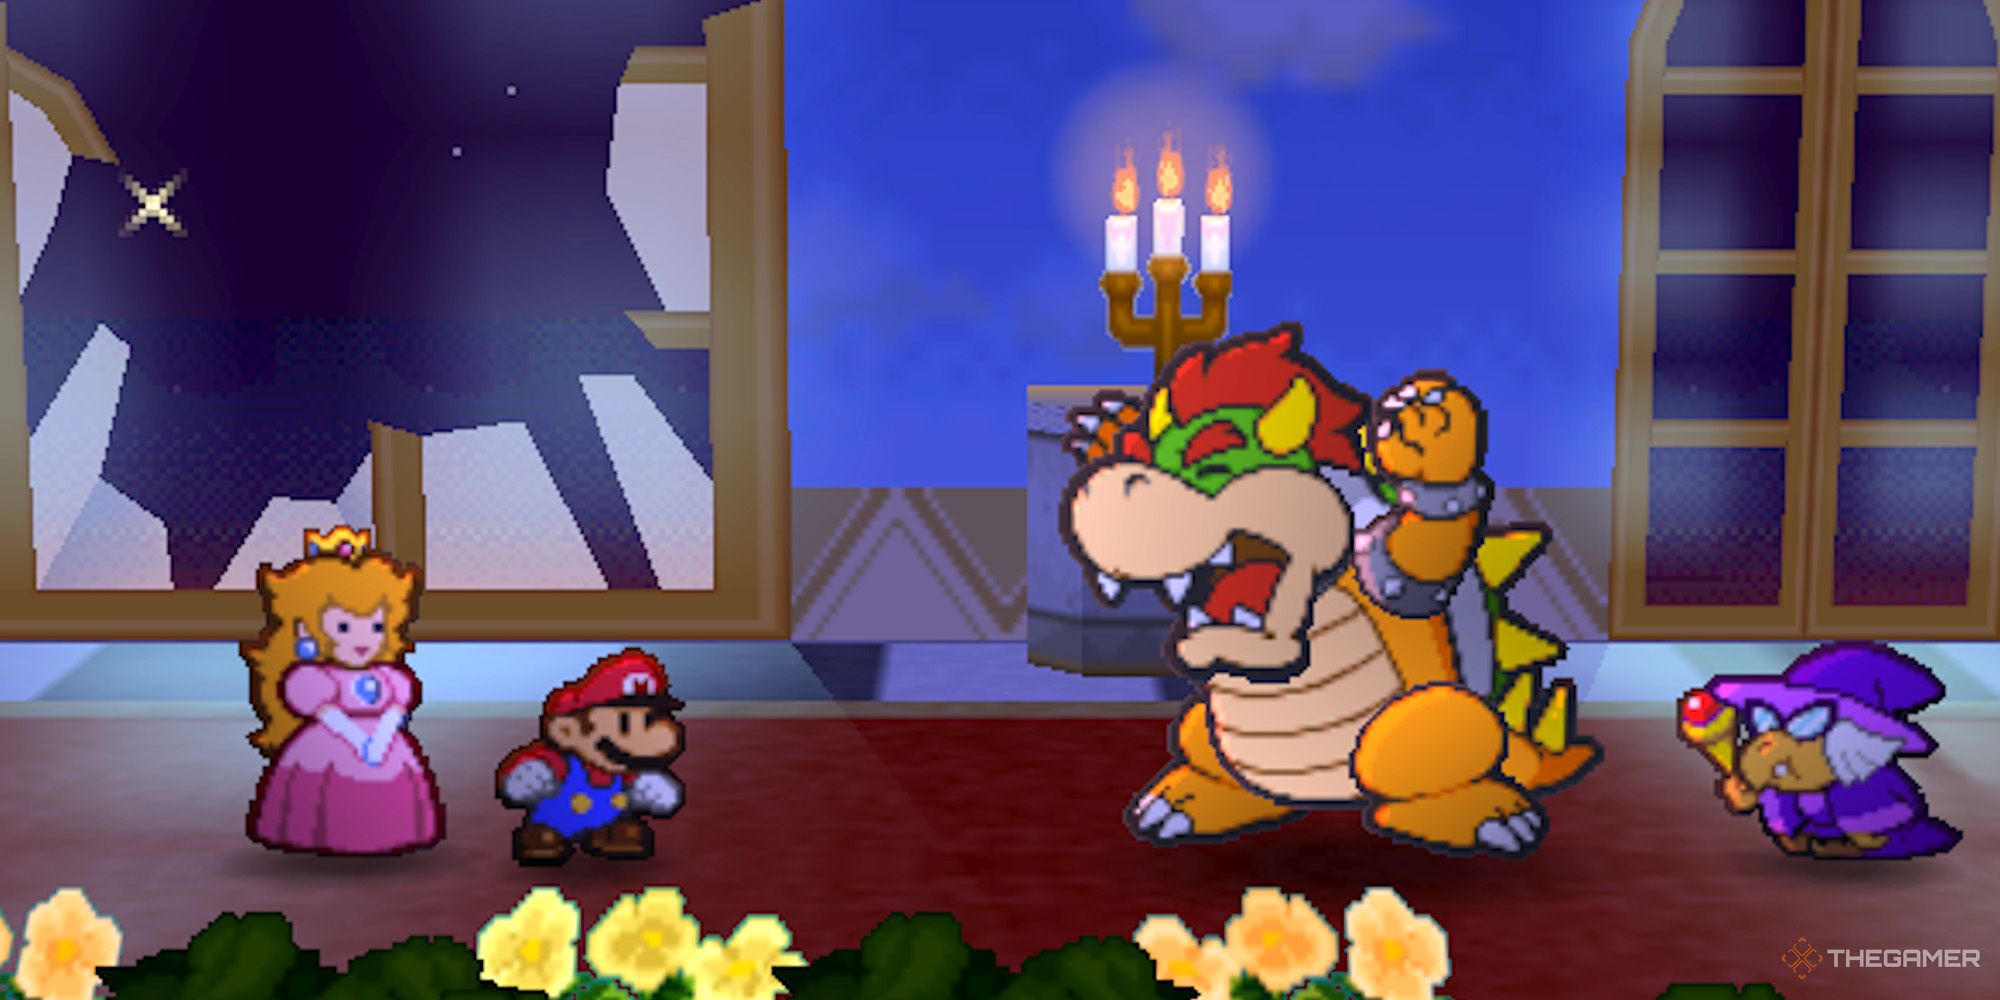 Paper Mario - Mario and Peach preparing to fight Bowser and Kammy